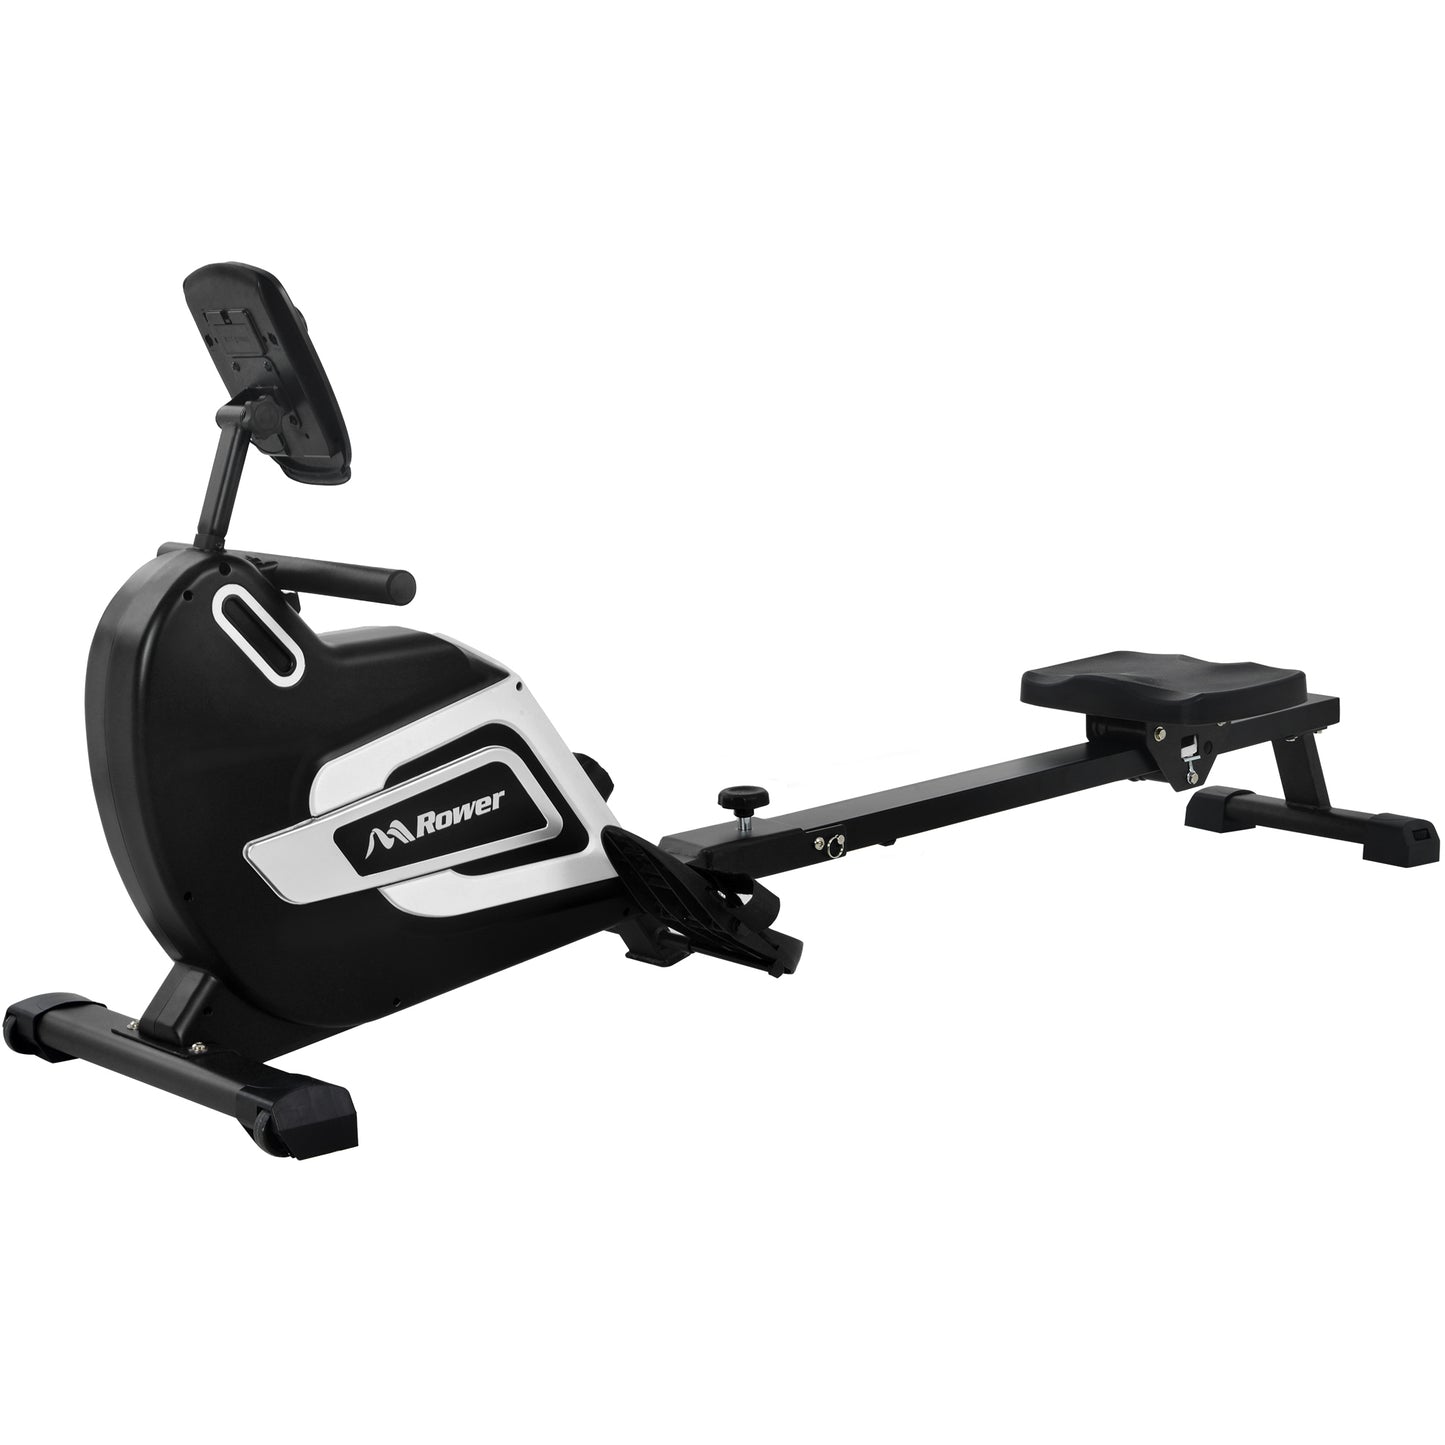 Rowing Machine Folding Rower with 14 Level Resistance Adjustable, LCD Monitor and Tablet Holder for Foldable Rower Home Gym Workout MLNshops